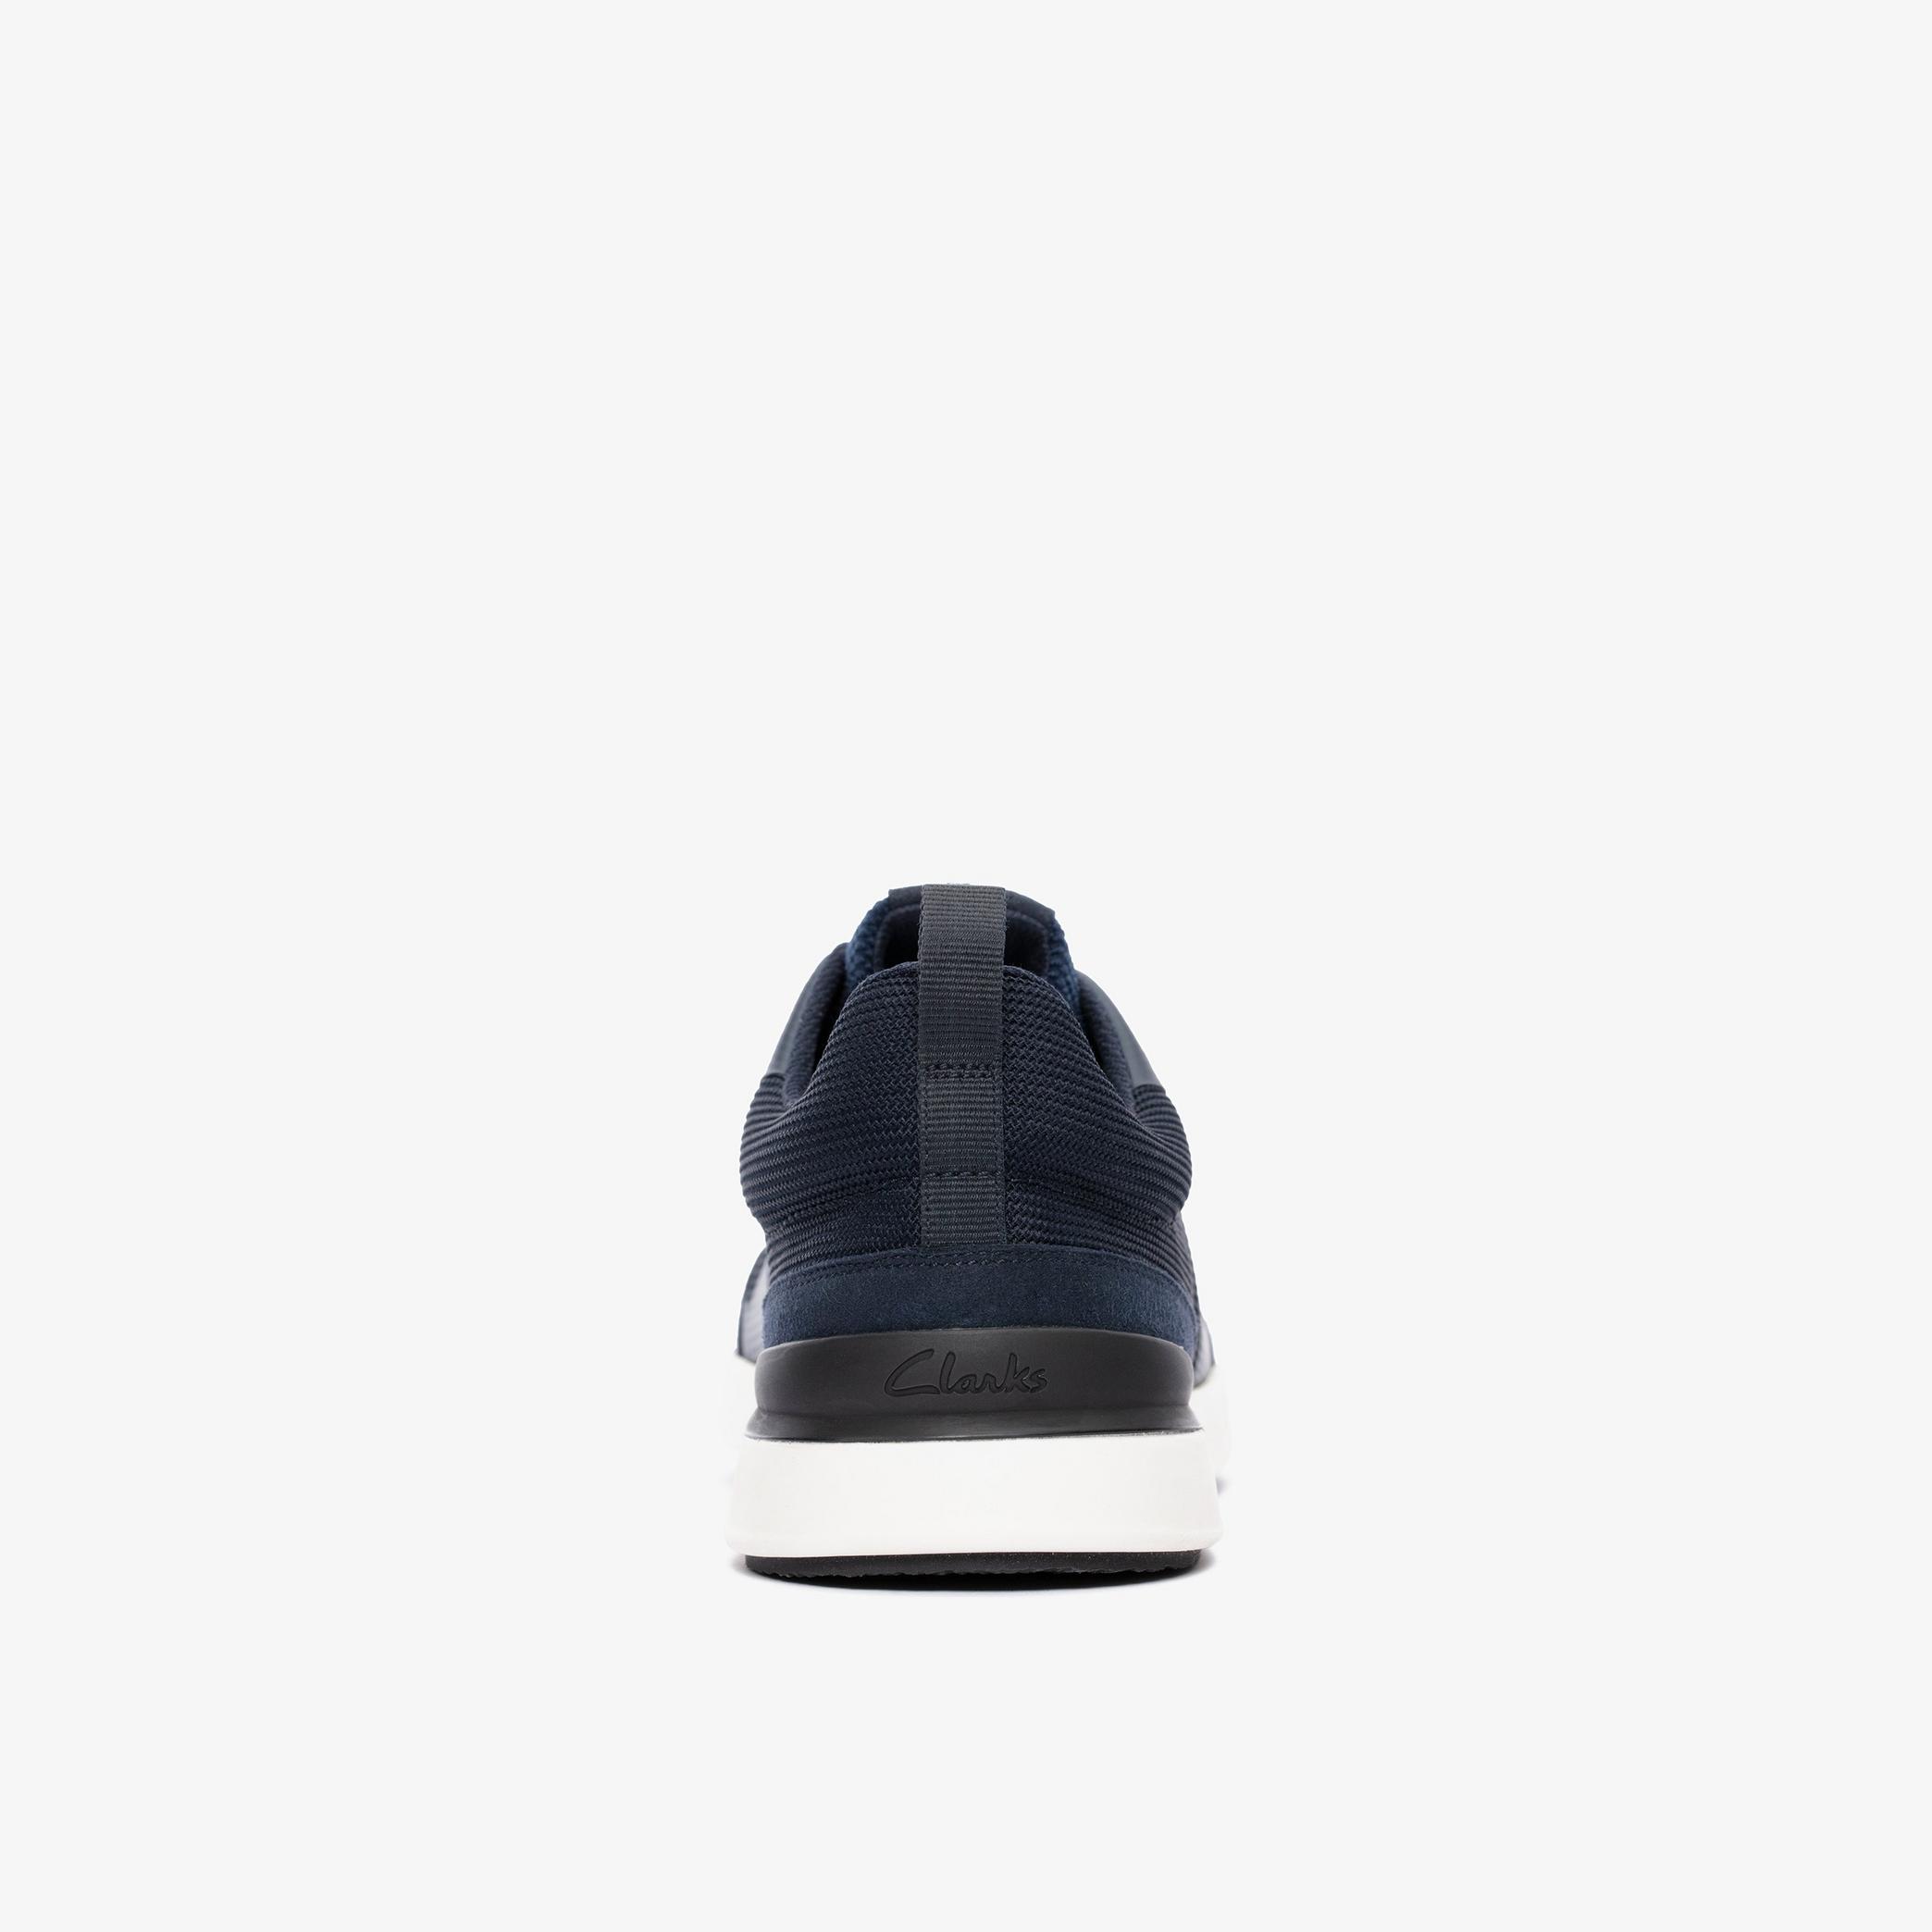 LT Lace Navy Knit Trainers, view 5 of 6